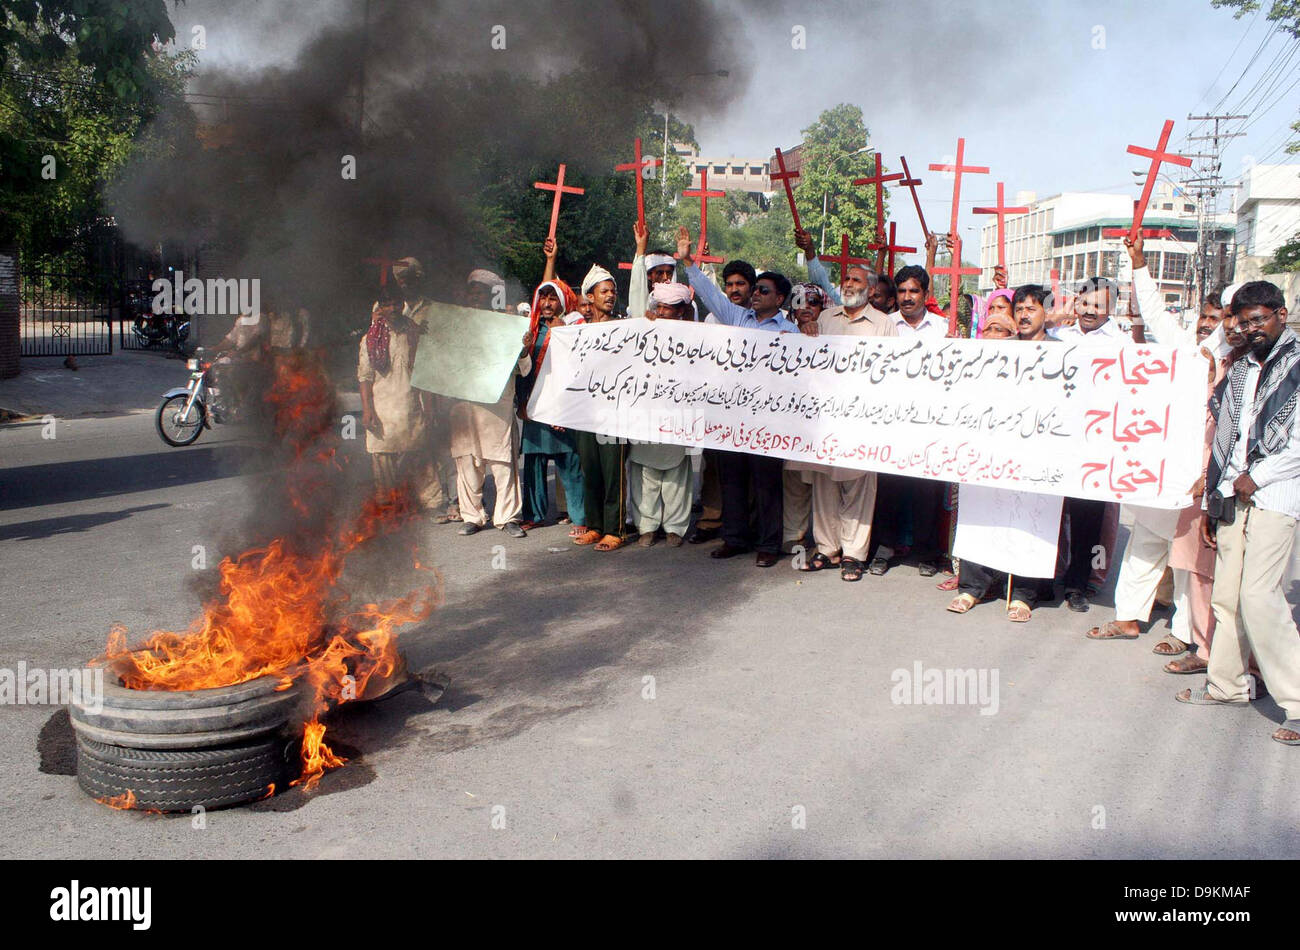 Residents of District Kasur Sadar Pattoki area stand near burning tyres as they are protesting against high- handedness of their area police officials during demonstration arranged by Human Liberation Commission at Lahore press club on Friday, June 21, 2013. Stock Photo